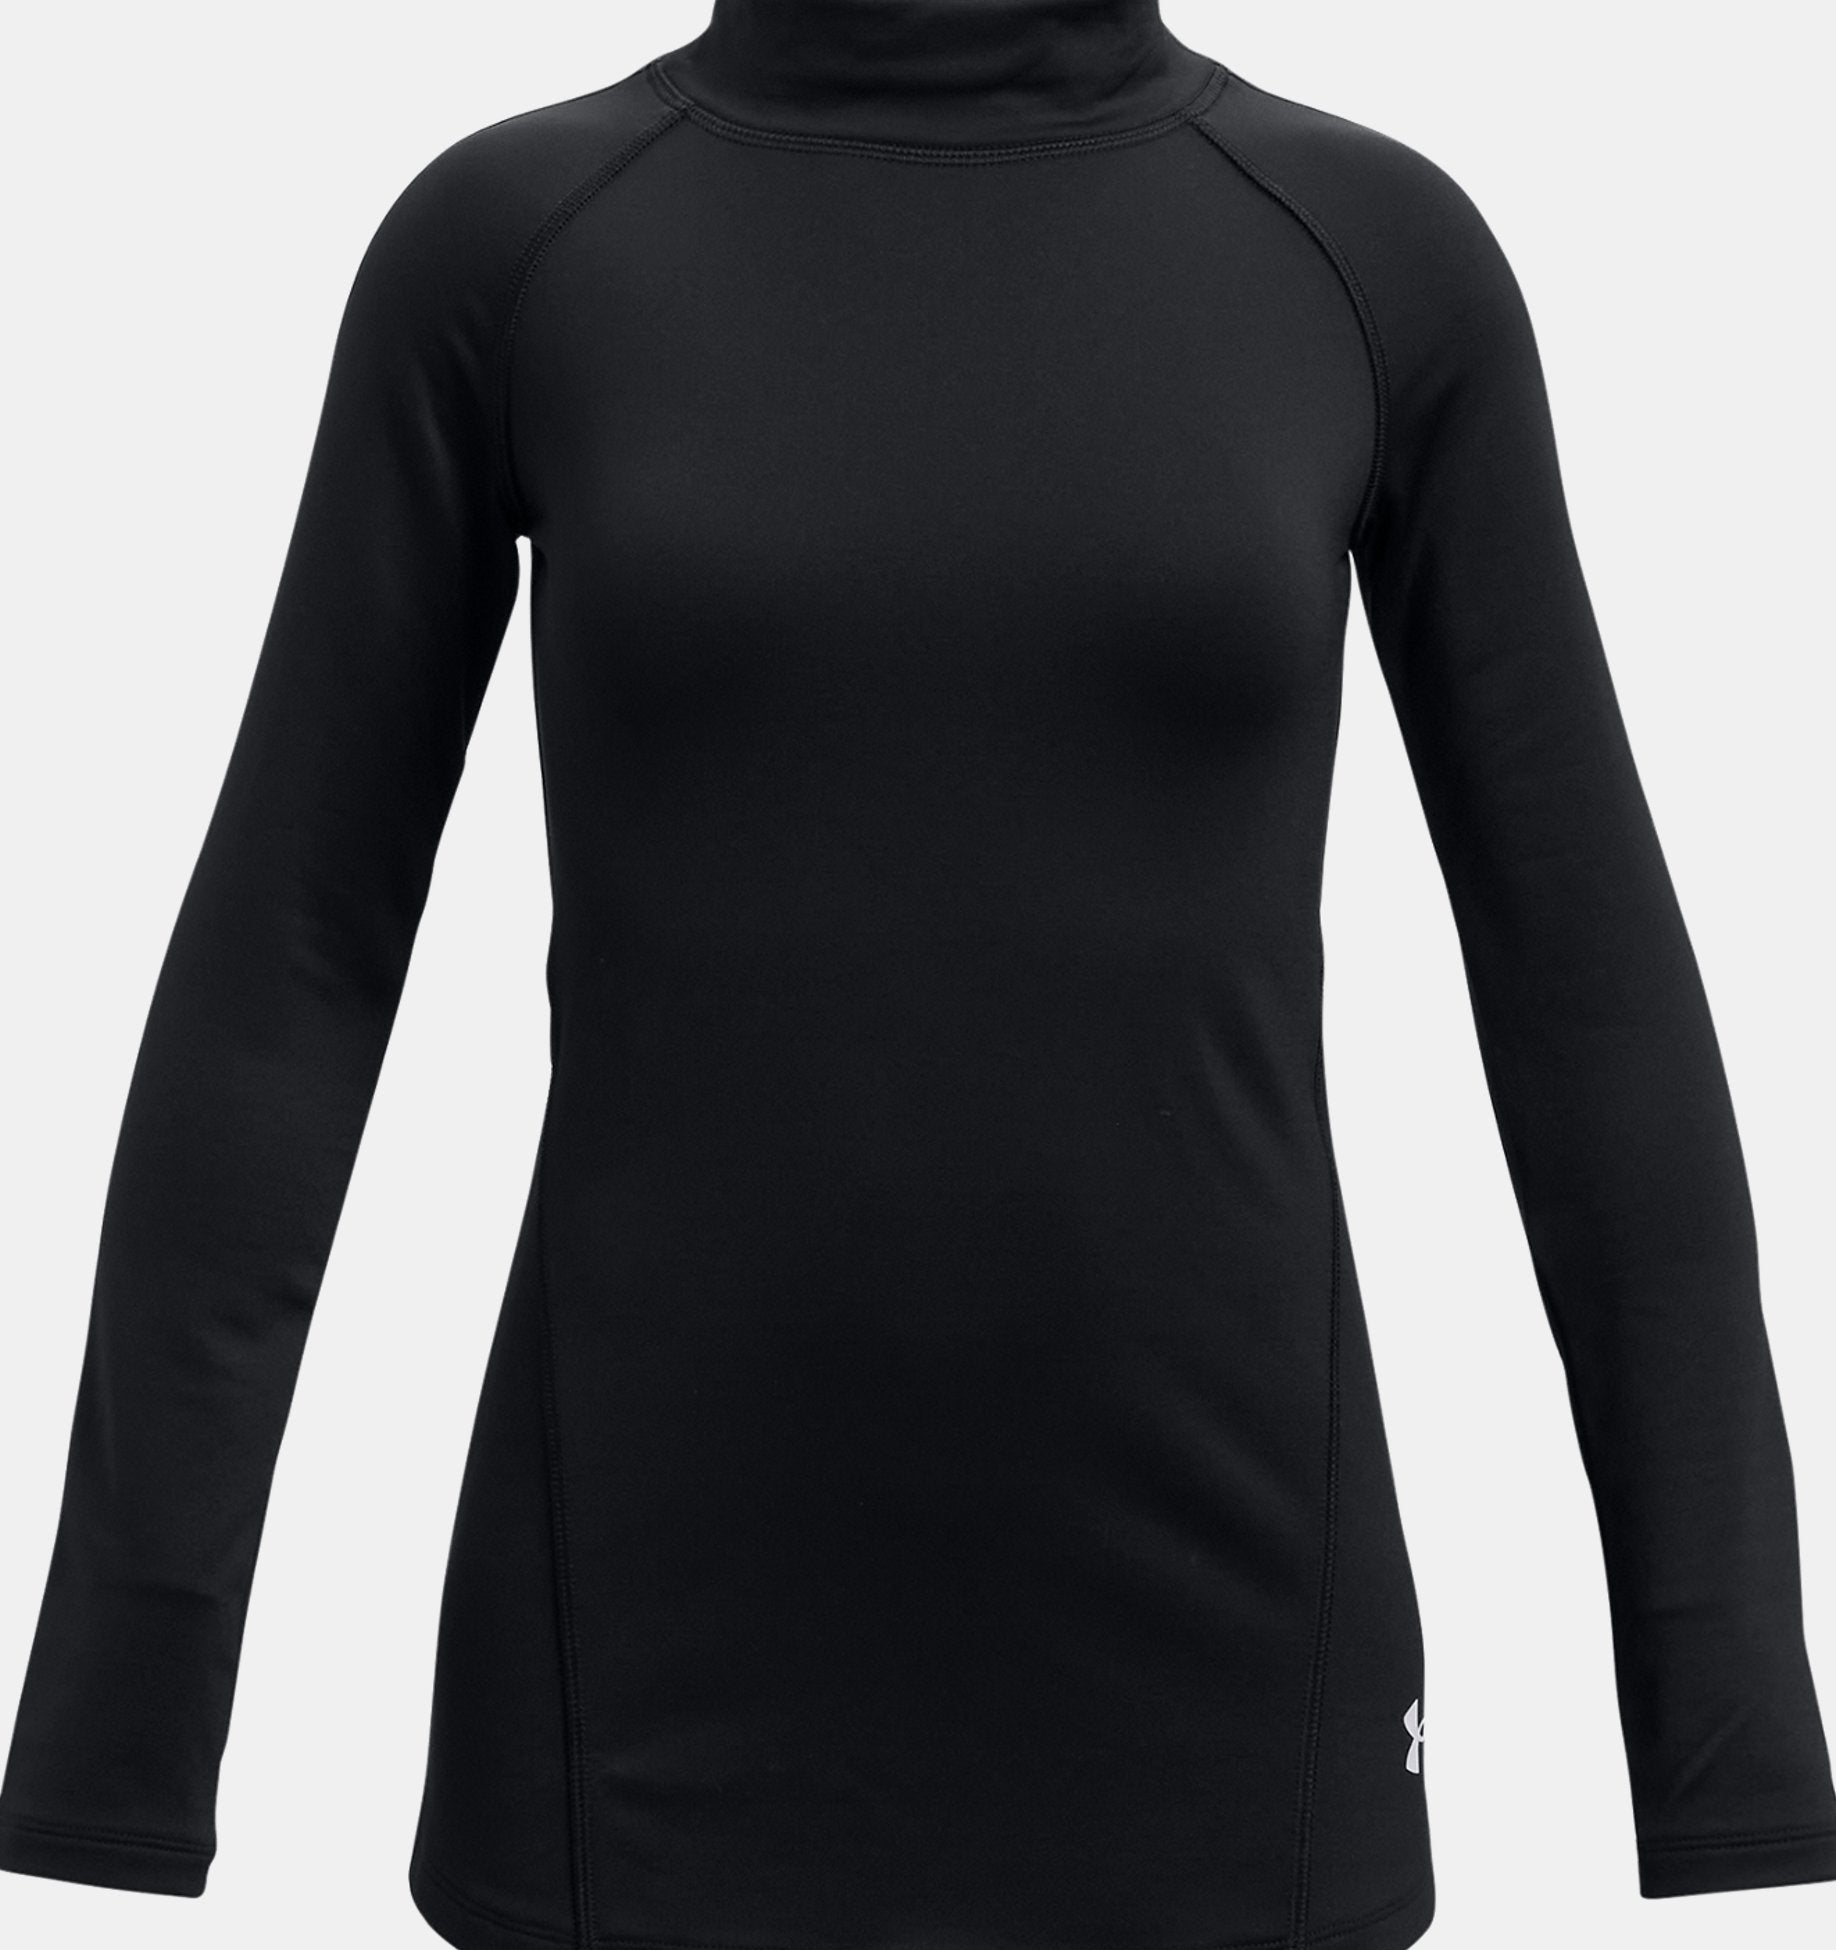 Under Armour Cold Gear Girl's Mock Long Sleeve Shirt-Sports Replay - Sports Excellence-Sports Replay - Sports Excellence